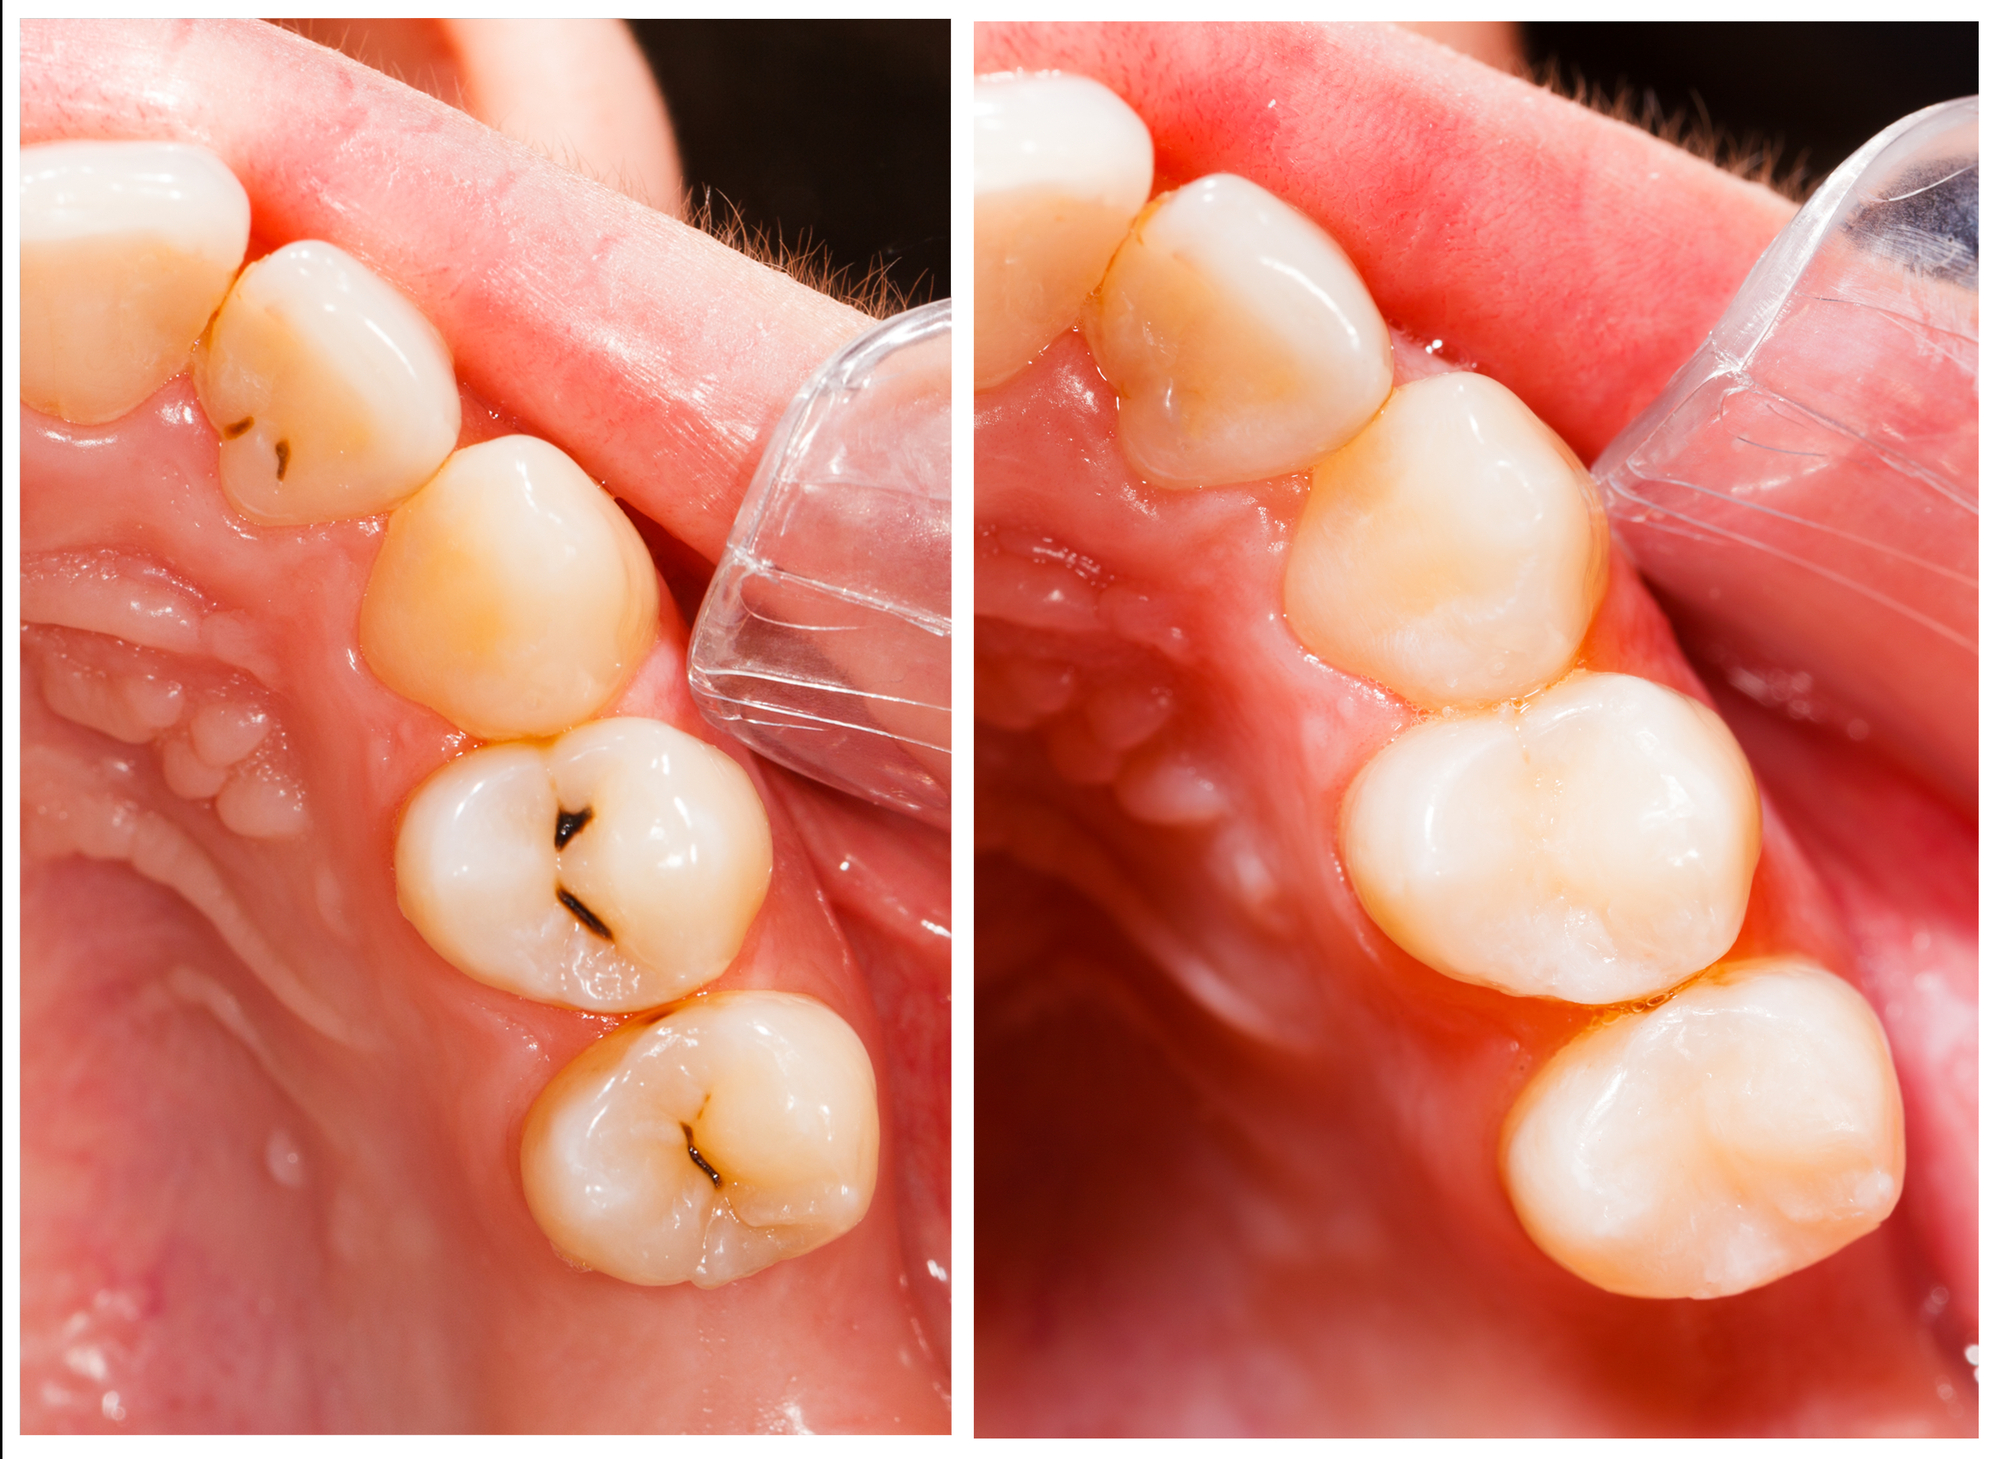 Side-by-side comparison of teeth with cavities and teeth with teeth fillings in place.